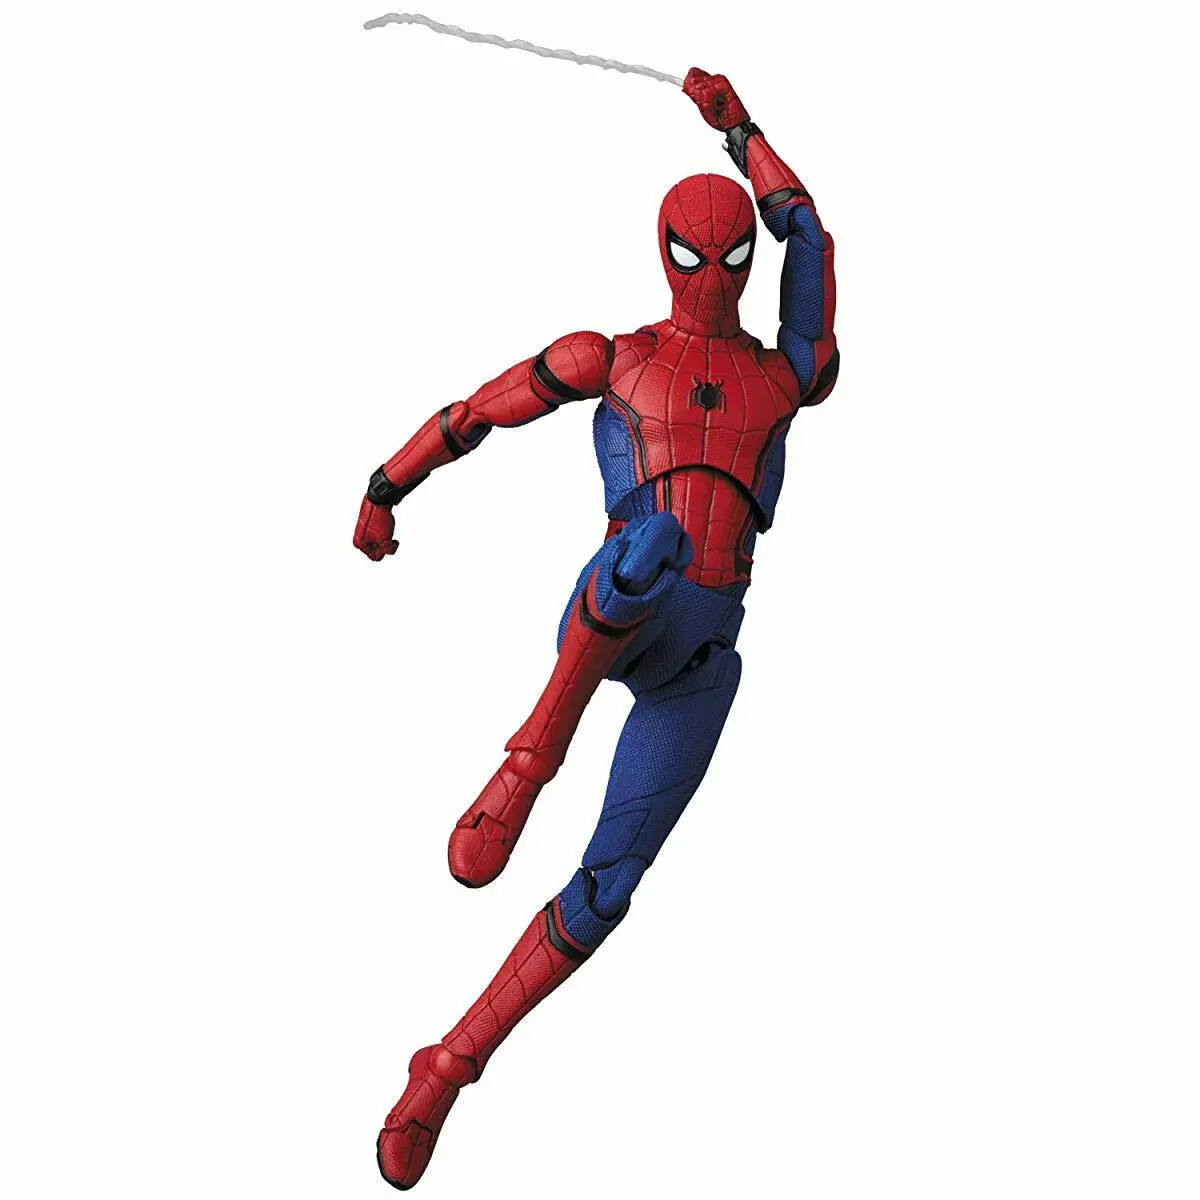 MAFEX No.103 MAFEX SPIDER-MAN HOMECOMING Ver.1.5 Medicom Toy Japan